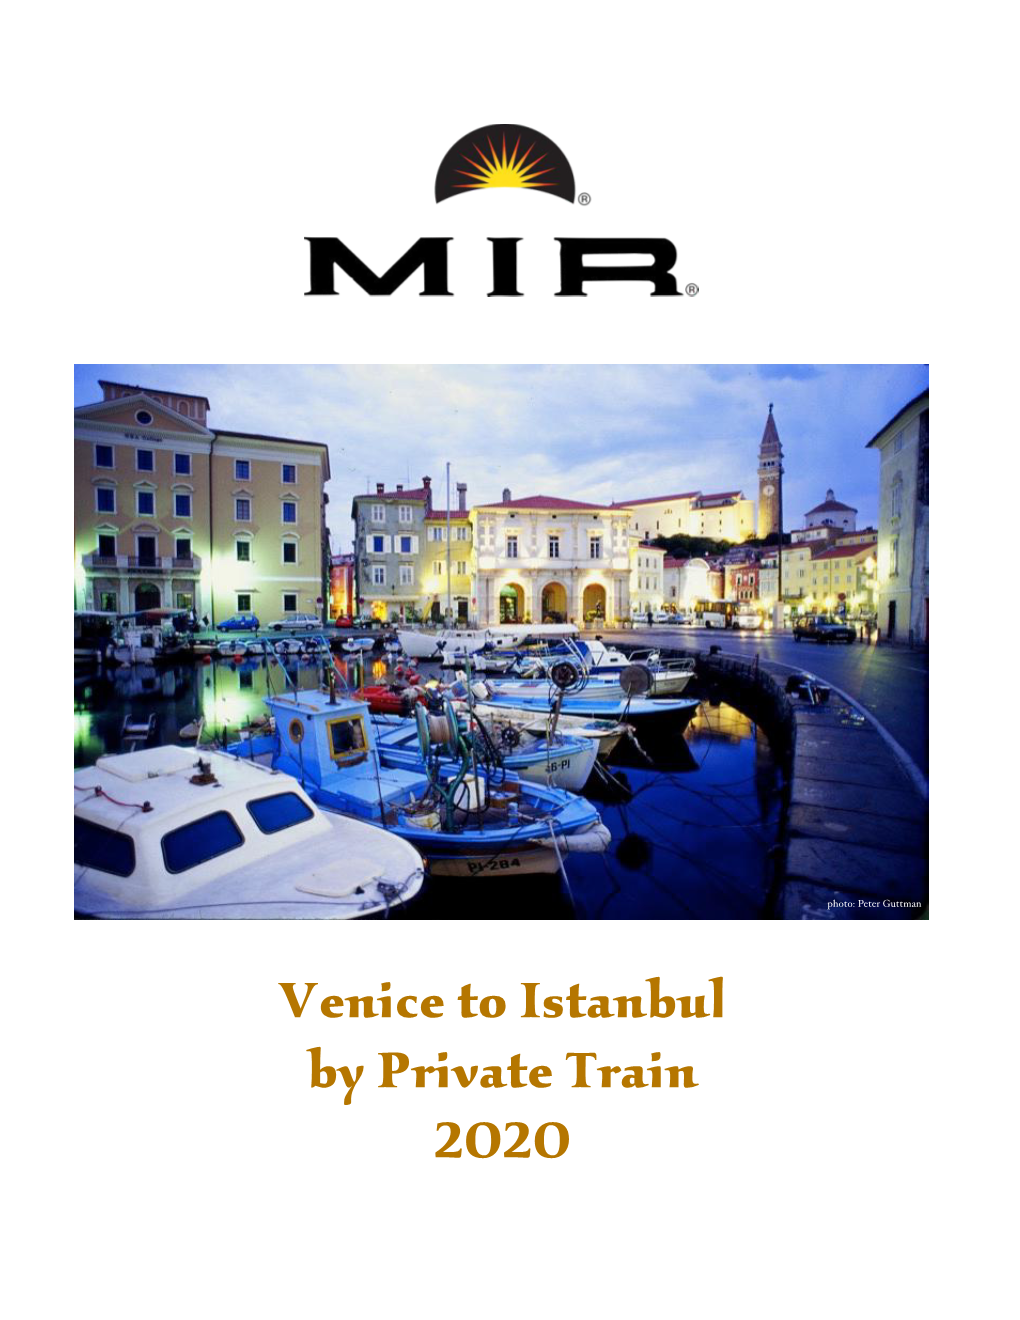 Venice to Istanbul by Private Train 2020